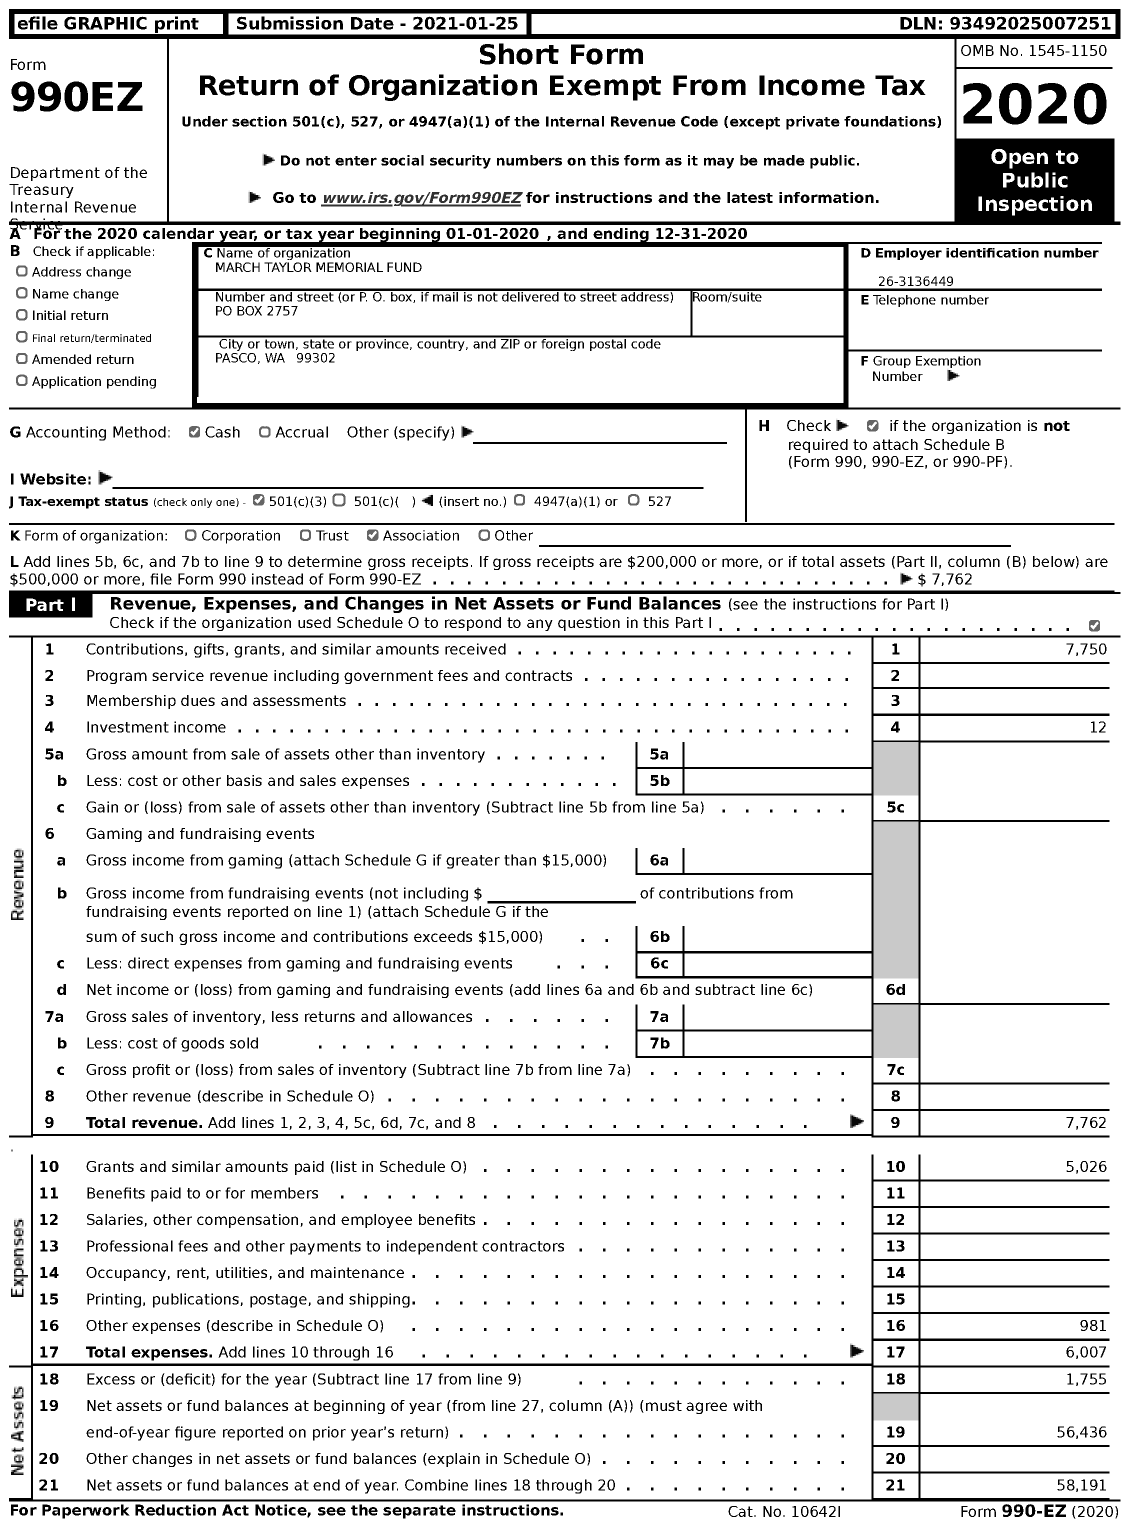 Image of first page of 2020 Form 990EZ for March Taylor Memorial Fund